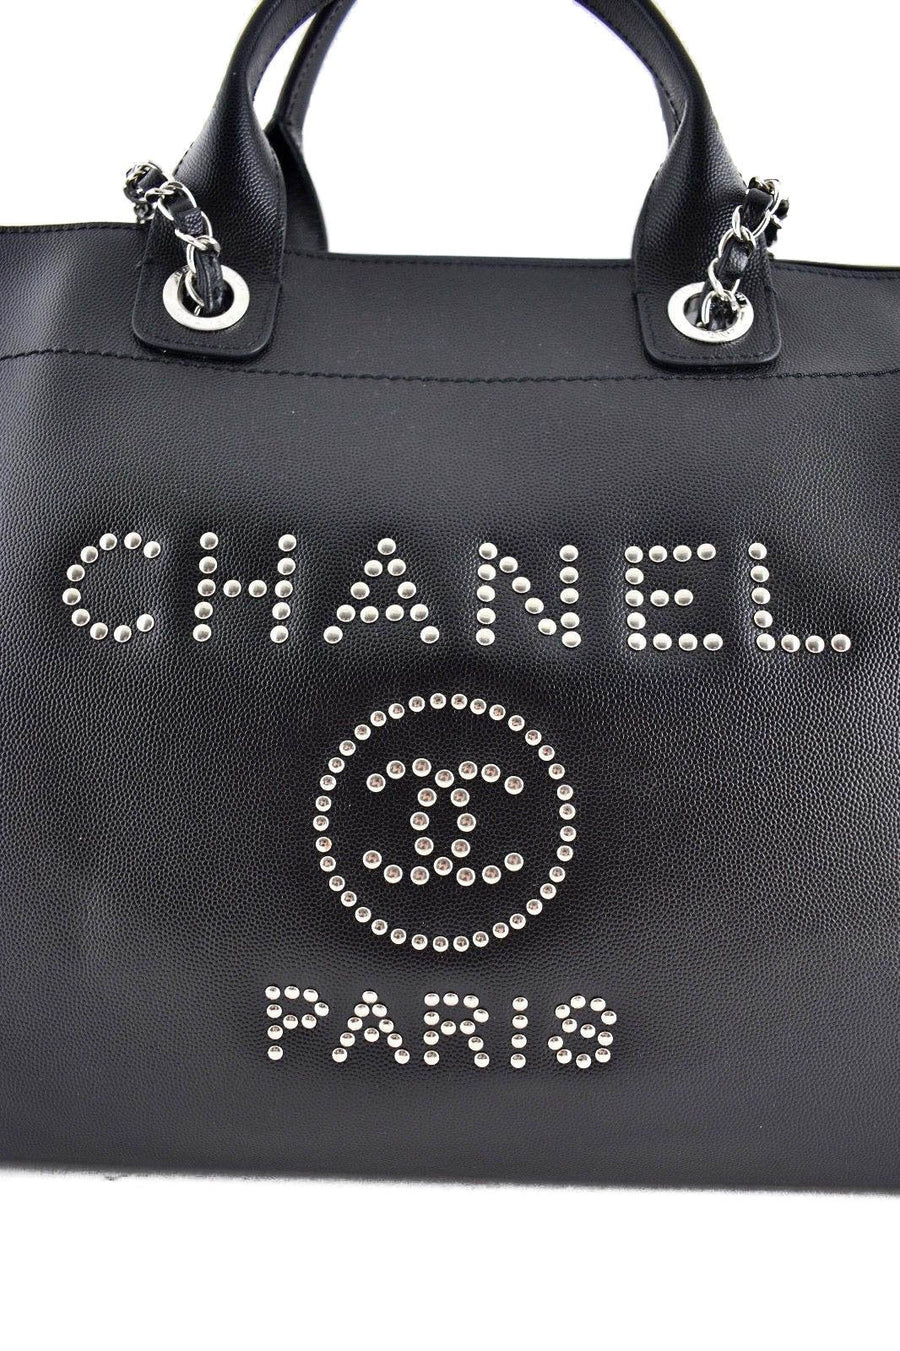 18P Deauville Black Caviar Extra Large CC Silver Studded Shopper Tote Bag CHANEL 